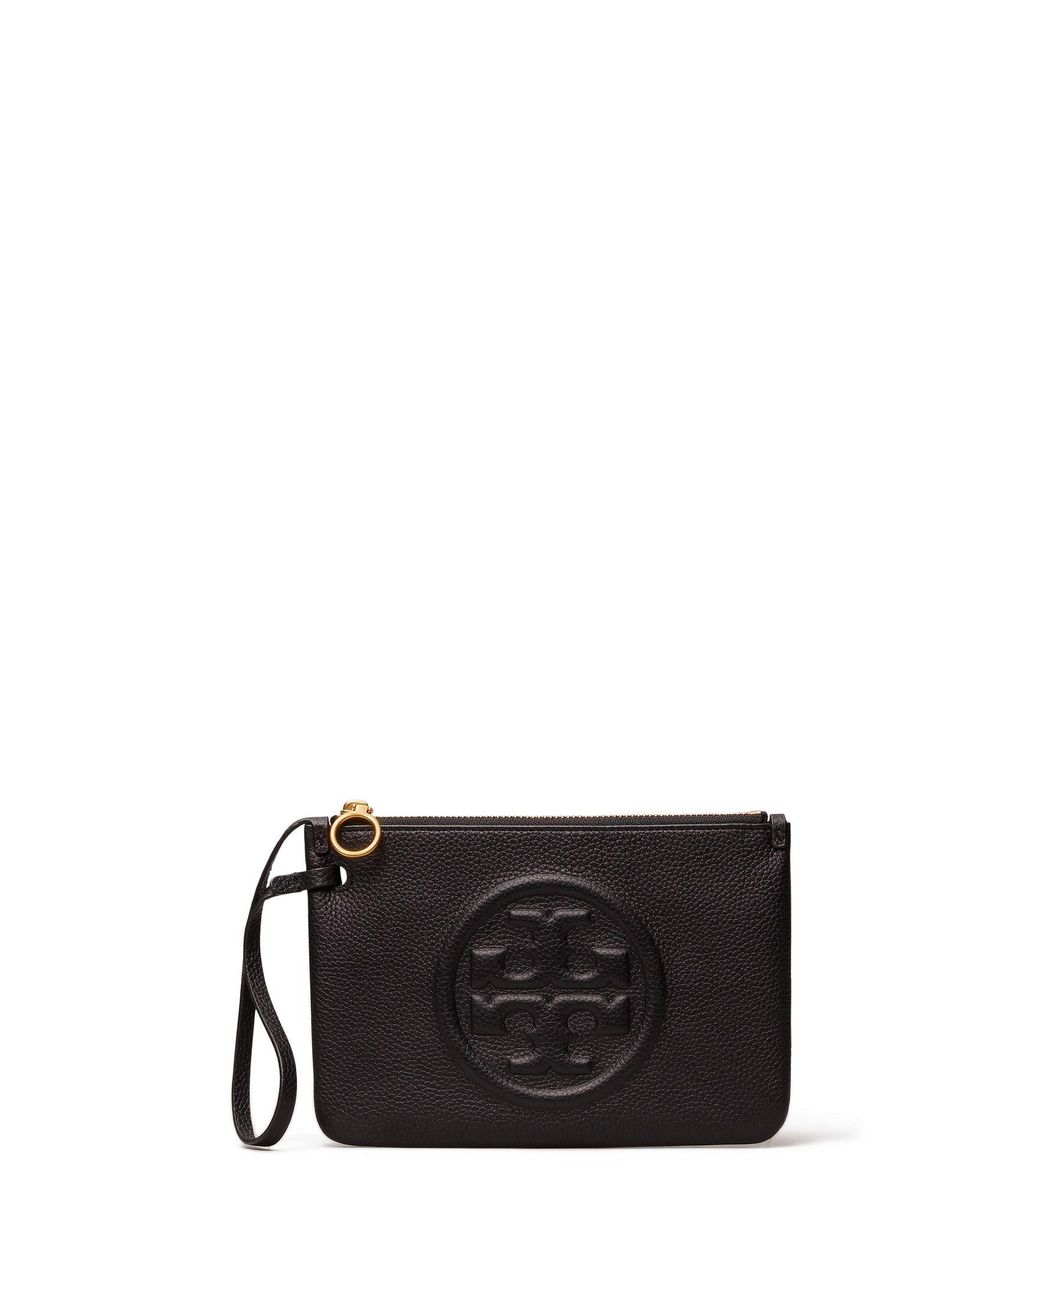 Tory Burch Leather Perry Bombe Wristlet in Black (Yellow) - Save 60% - Lyst